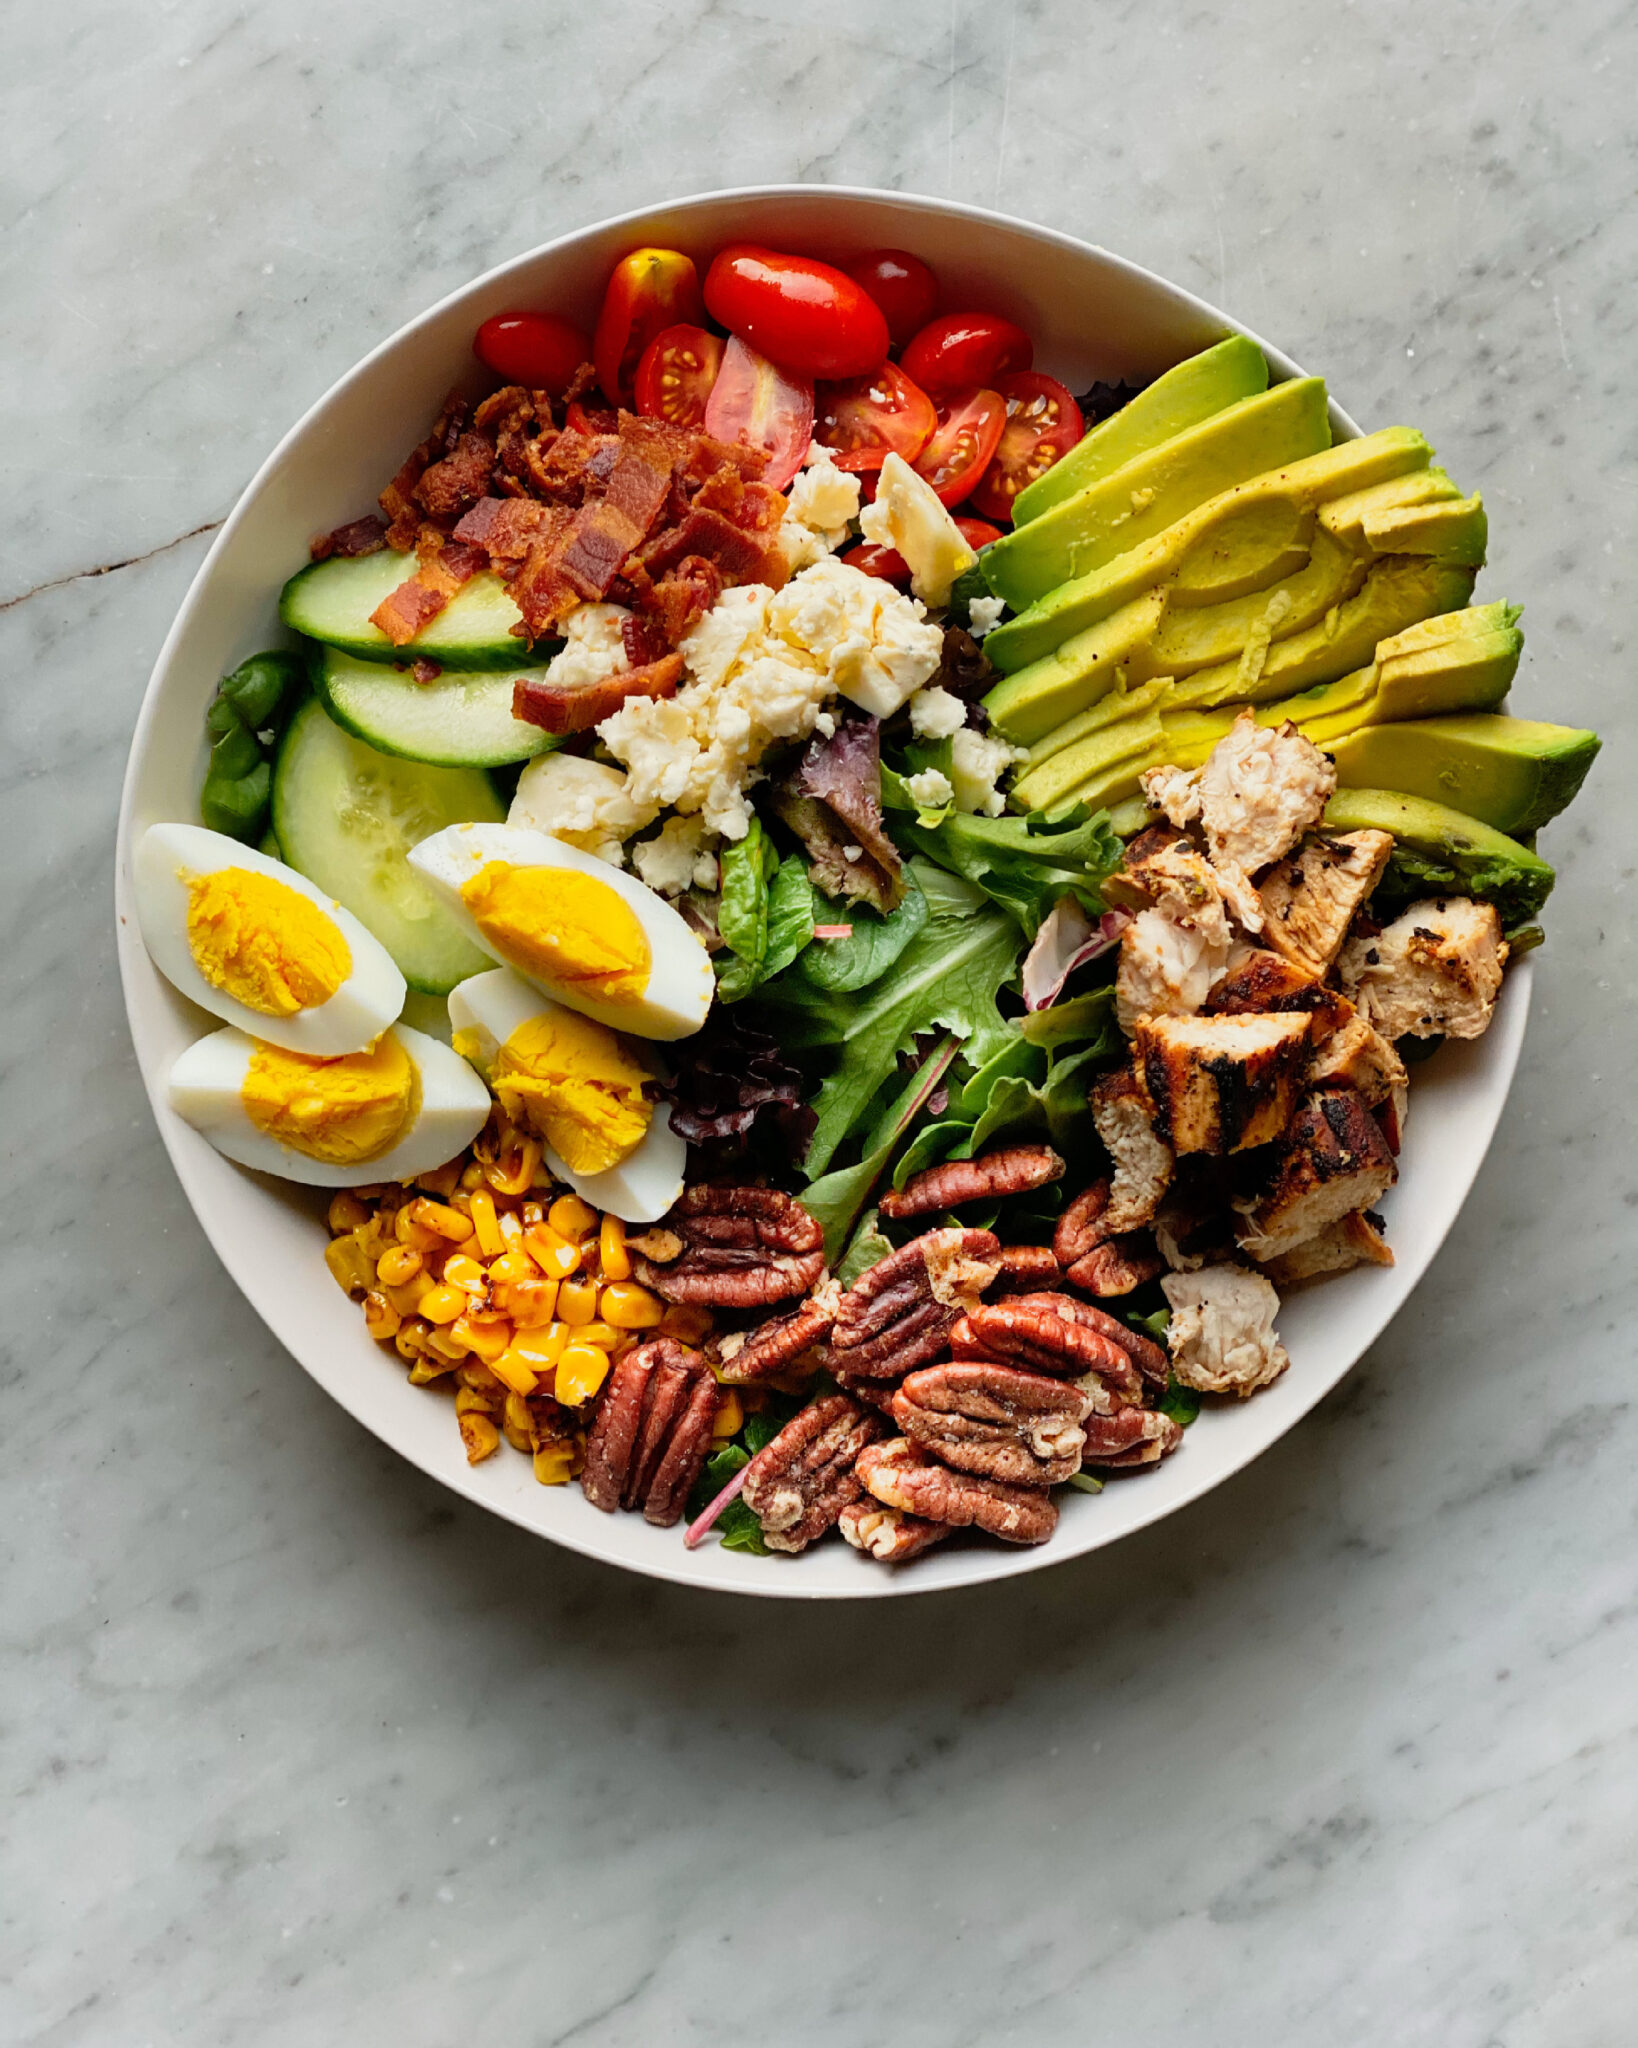 Chicken salad with avocado, roasted pecans, cor, eggs, cucumbers and bacon